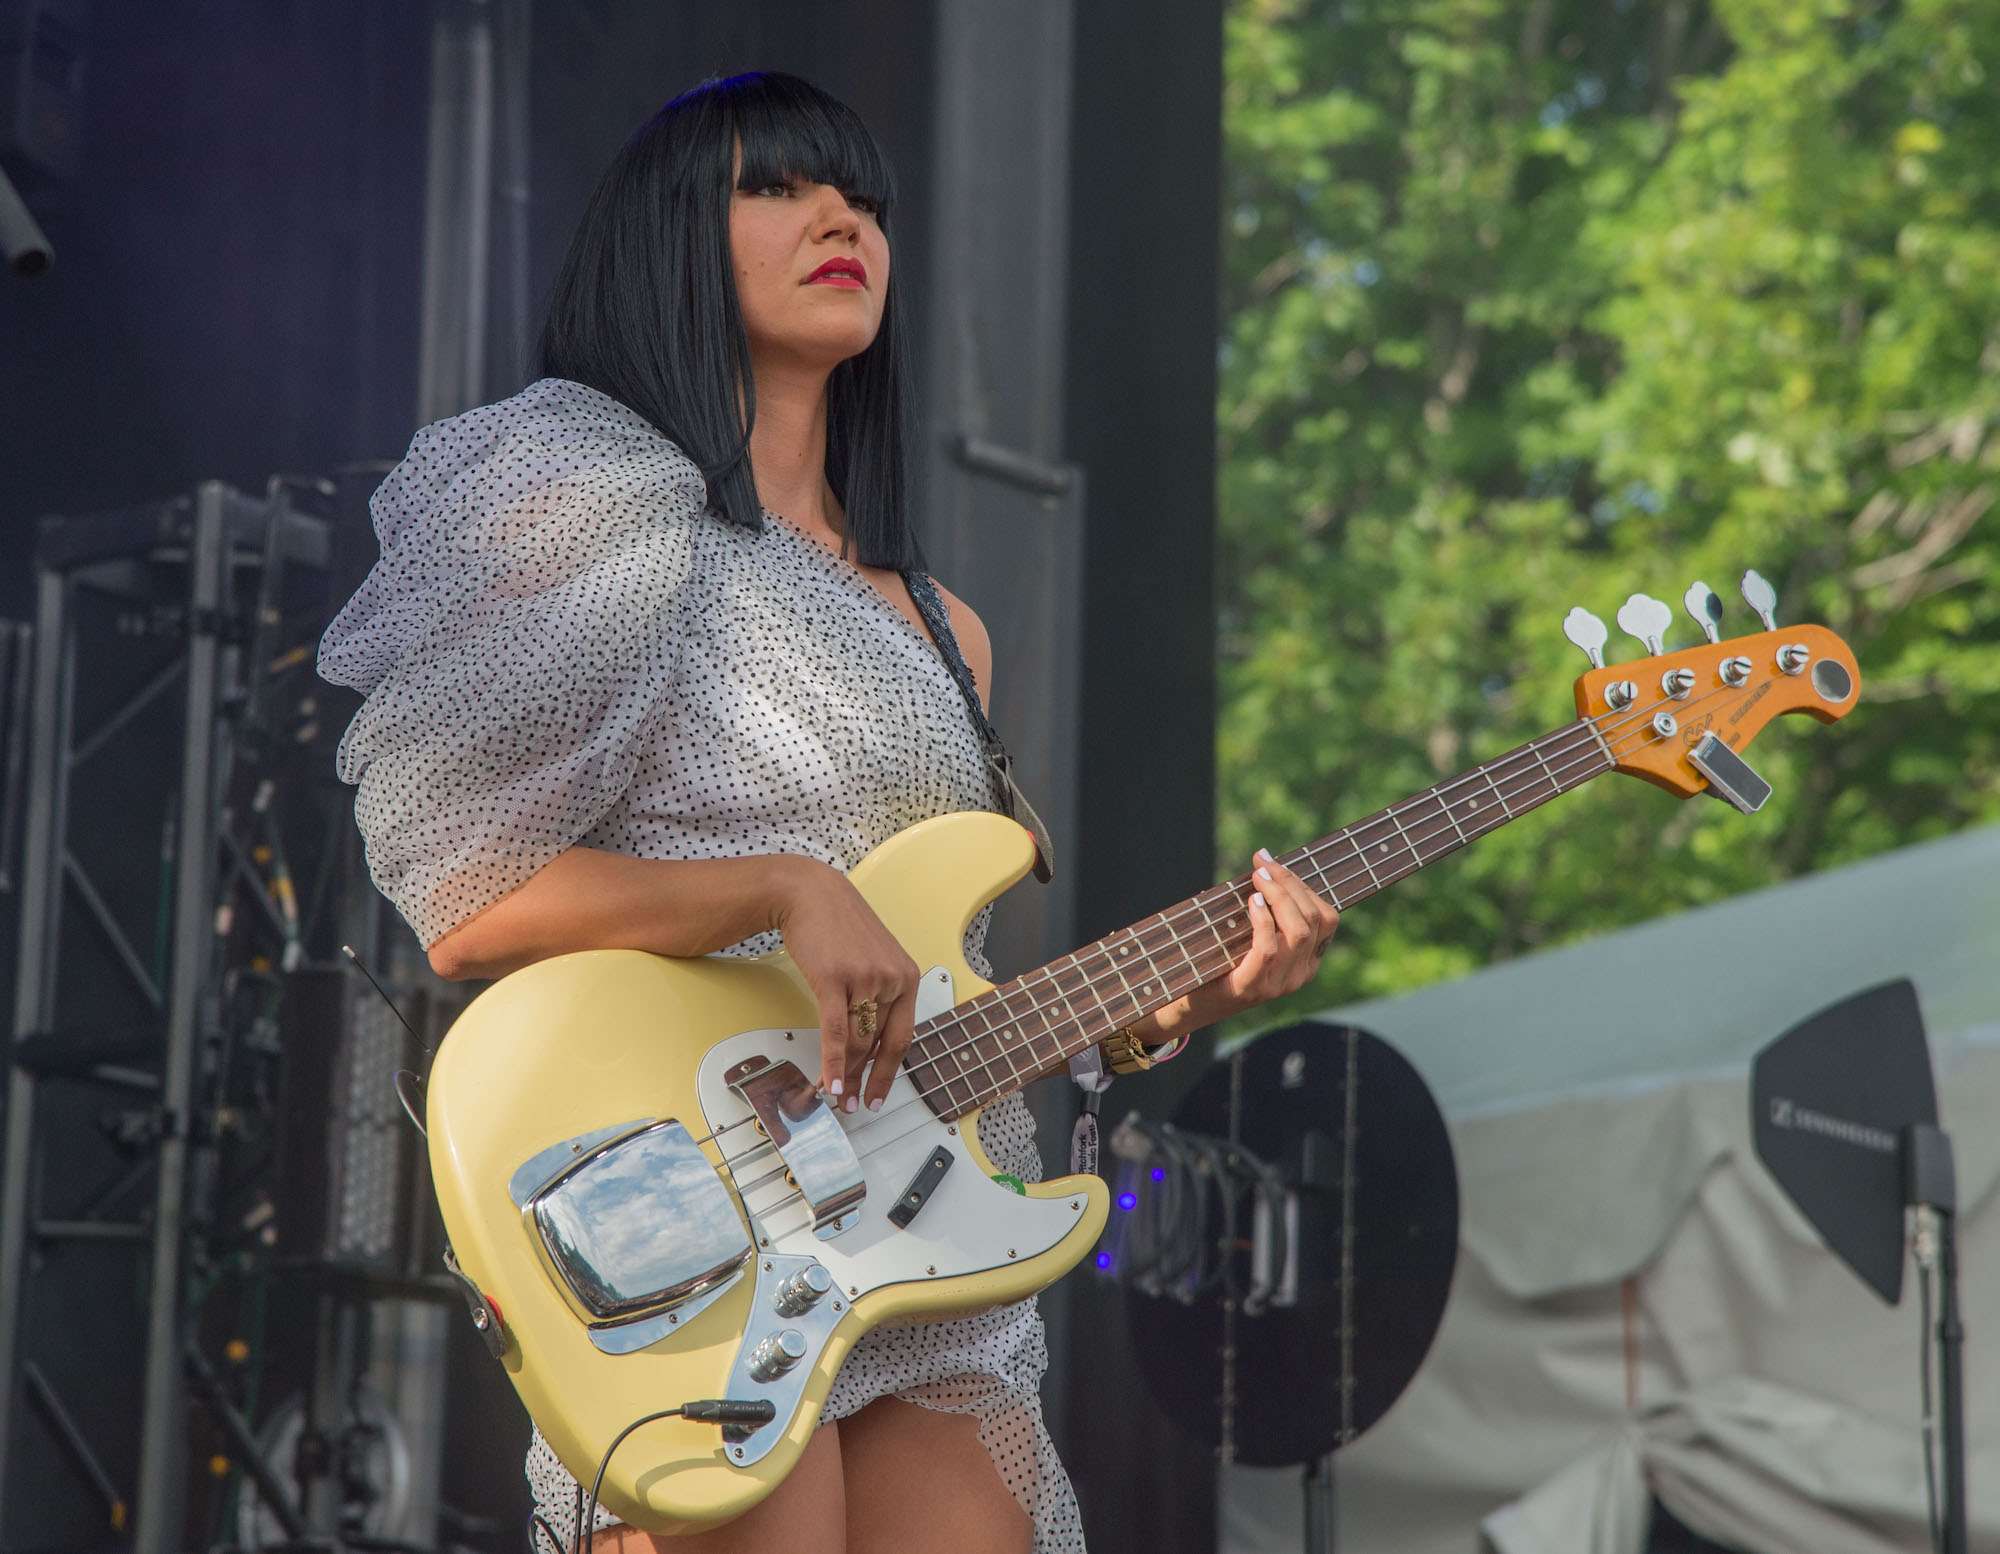 Khruangbin Live at Pitchfork [GALLERY] - Chicago Music Guide